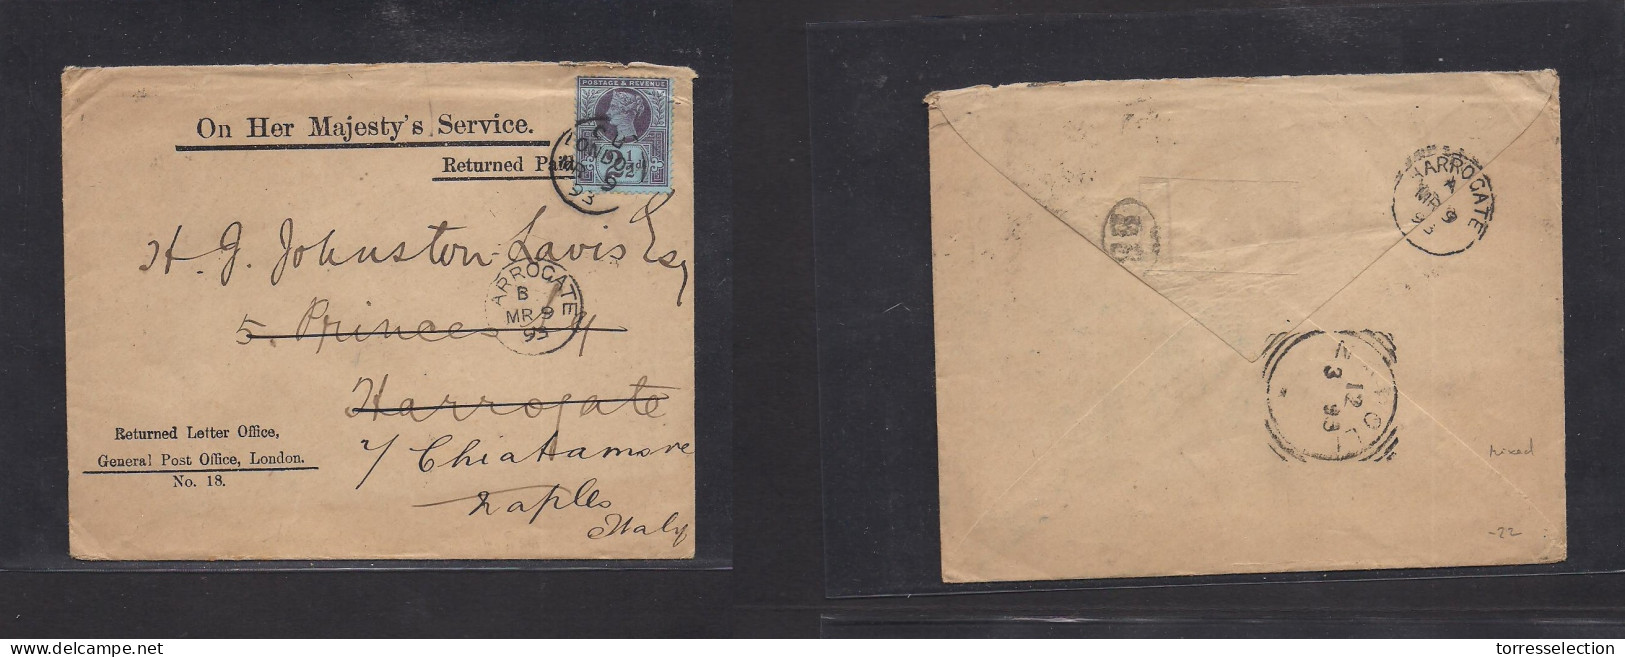 GREAT BRITAIN. 1893 (9 March) London - Harrogate Official Service Fkd 2 1/2d Stamp Sea Addressed To Italy, Naples, Mixed - ...-1840 Vorläufer